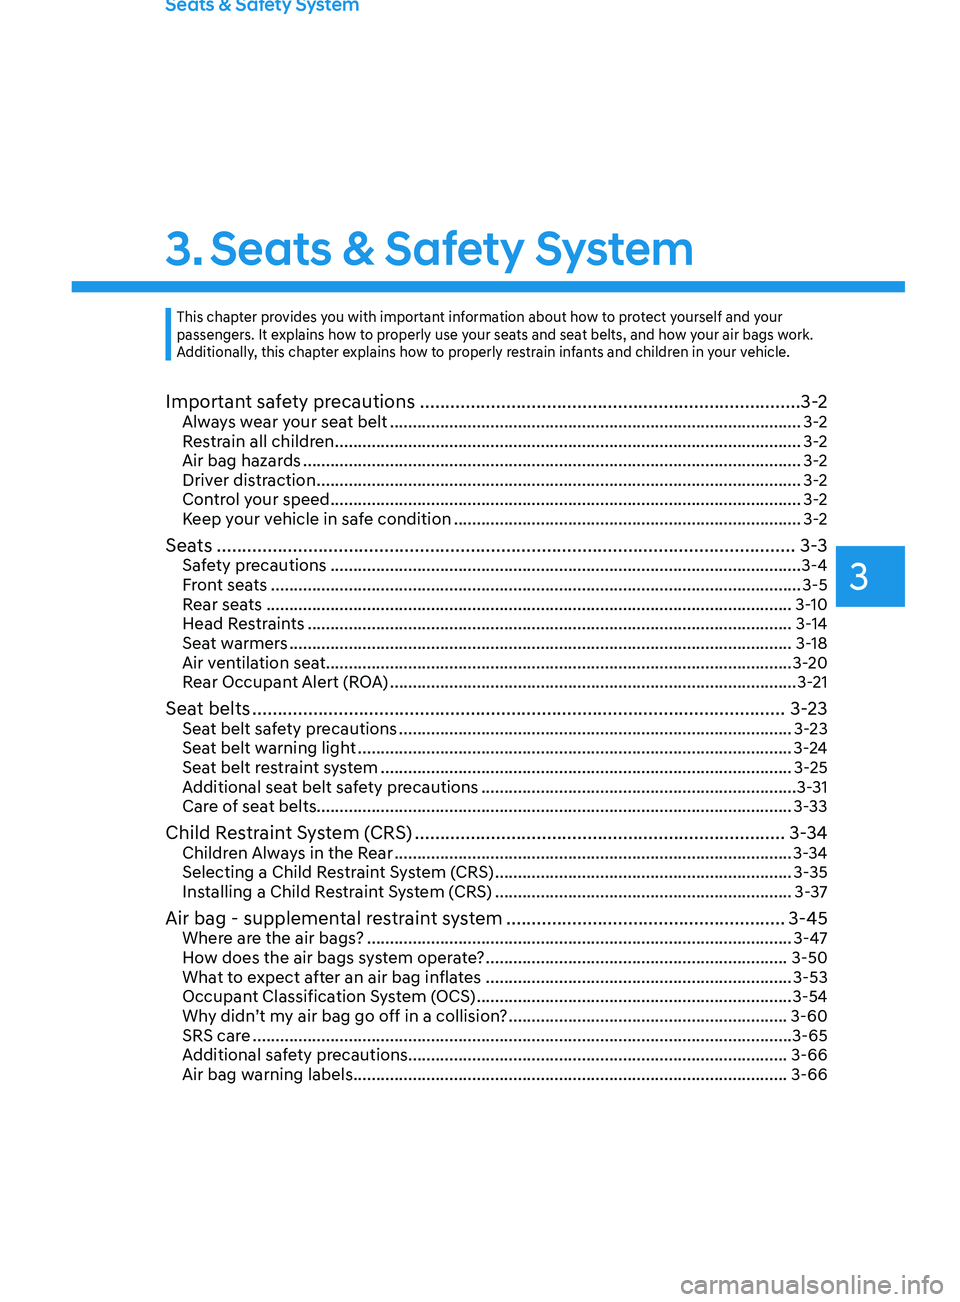 HYUNDAI SANTA FE CALLIGRAPHY 2021  Owners Manual Seats & Safety System
3. Seats & Safety System
Important safety precautions ........................................................................\
... 3-2Always wear your seat belt ................